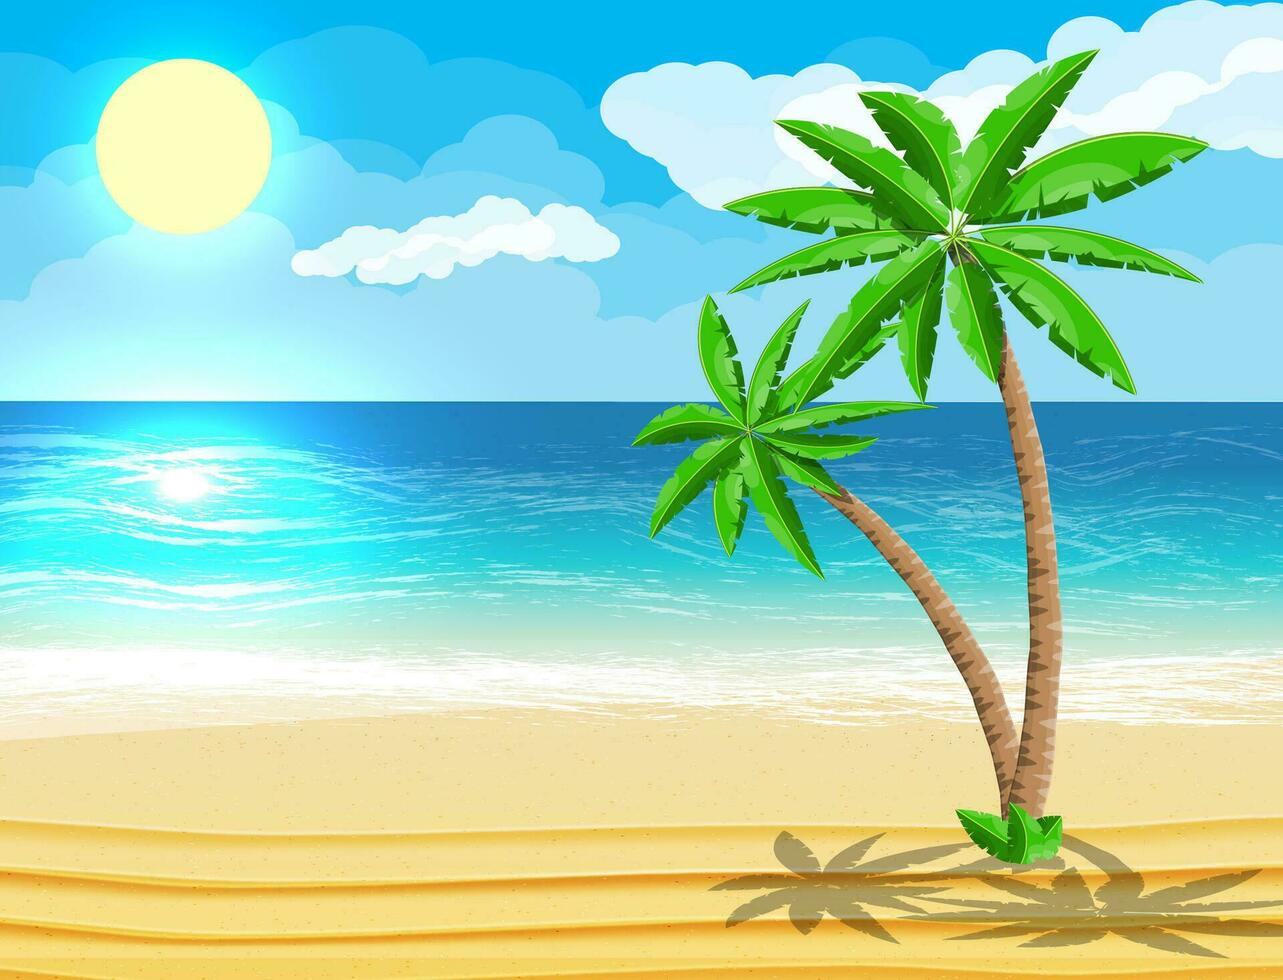 Landscape of palm tree on beach. Sun with reflection in water and clouds. Day in tropical place. Vector illustration in flat style